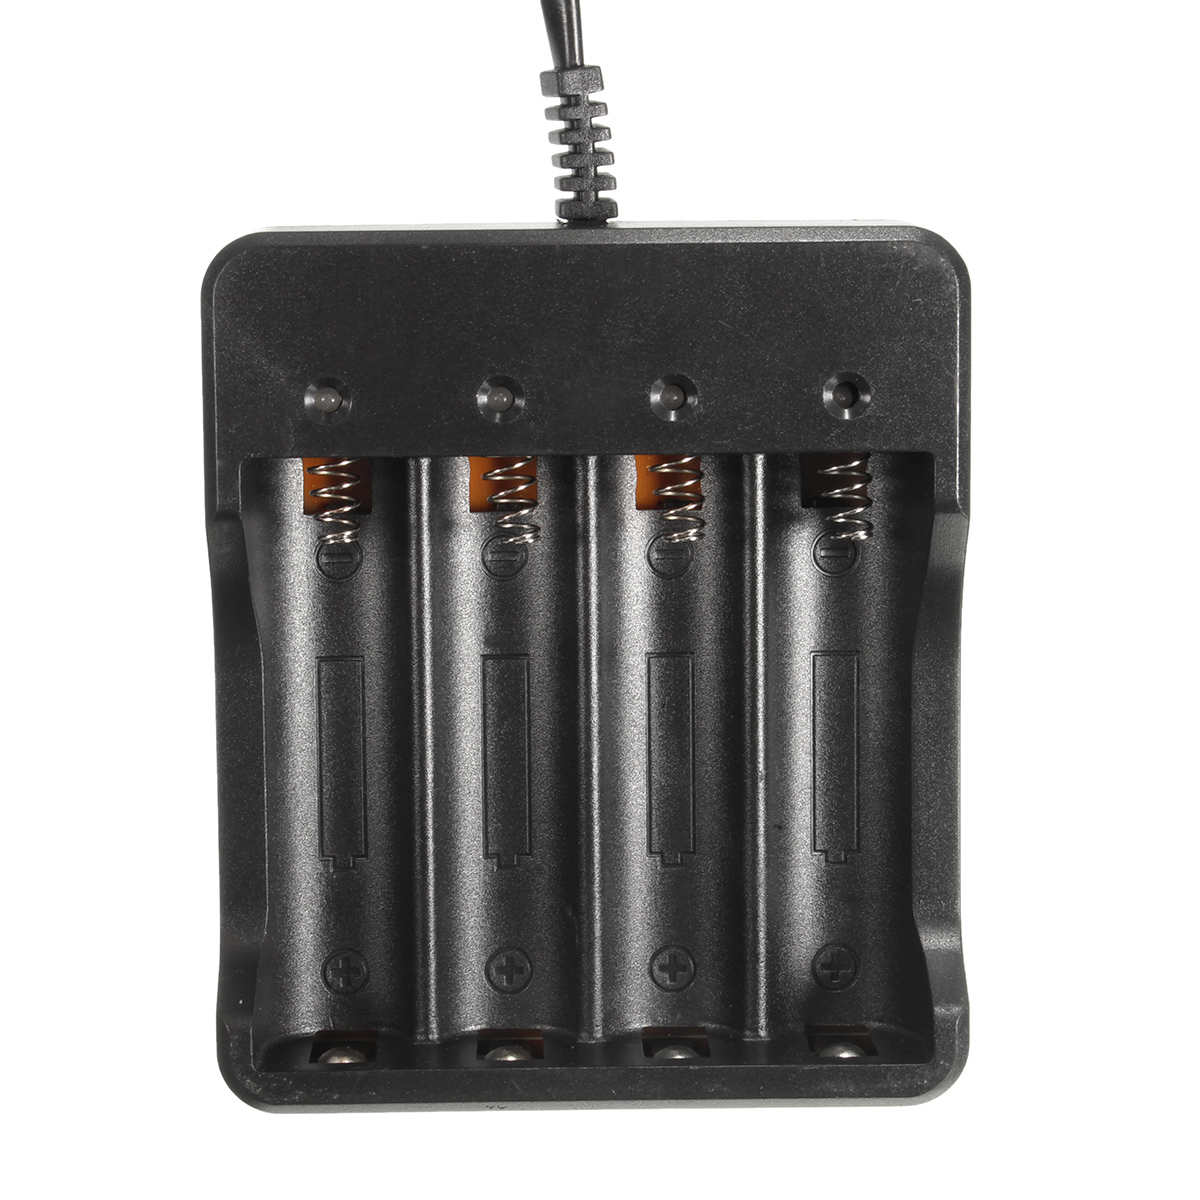 DC-42V-1200mA-Smart-Charger-4-Slots-Fast-Charging-For-18650-Li-ion-Battery-1623587-6